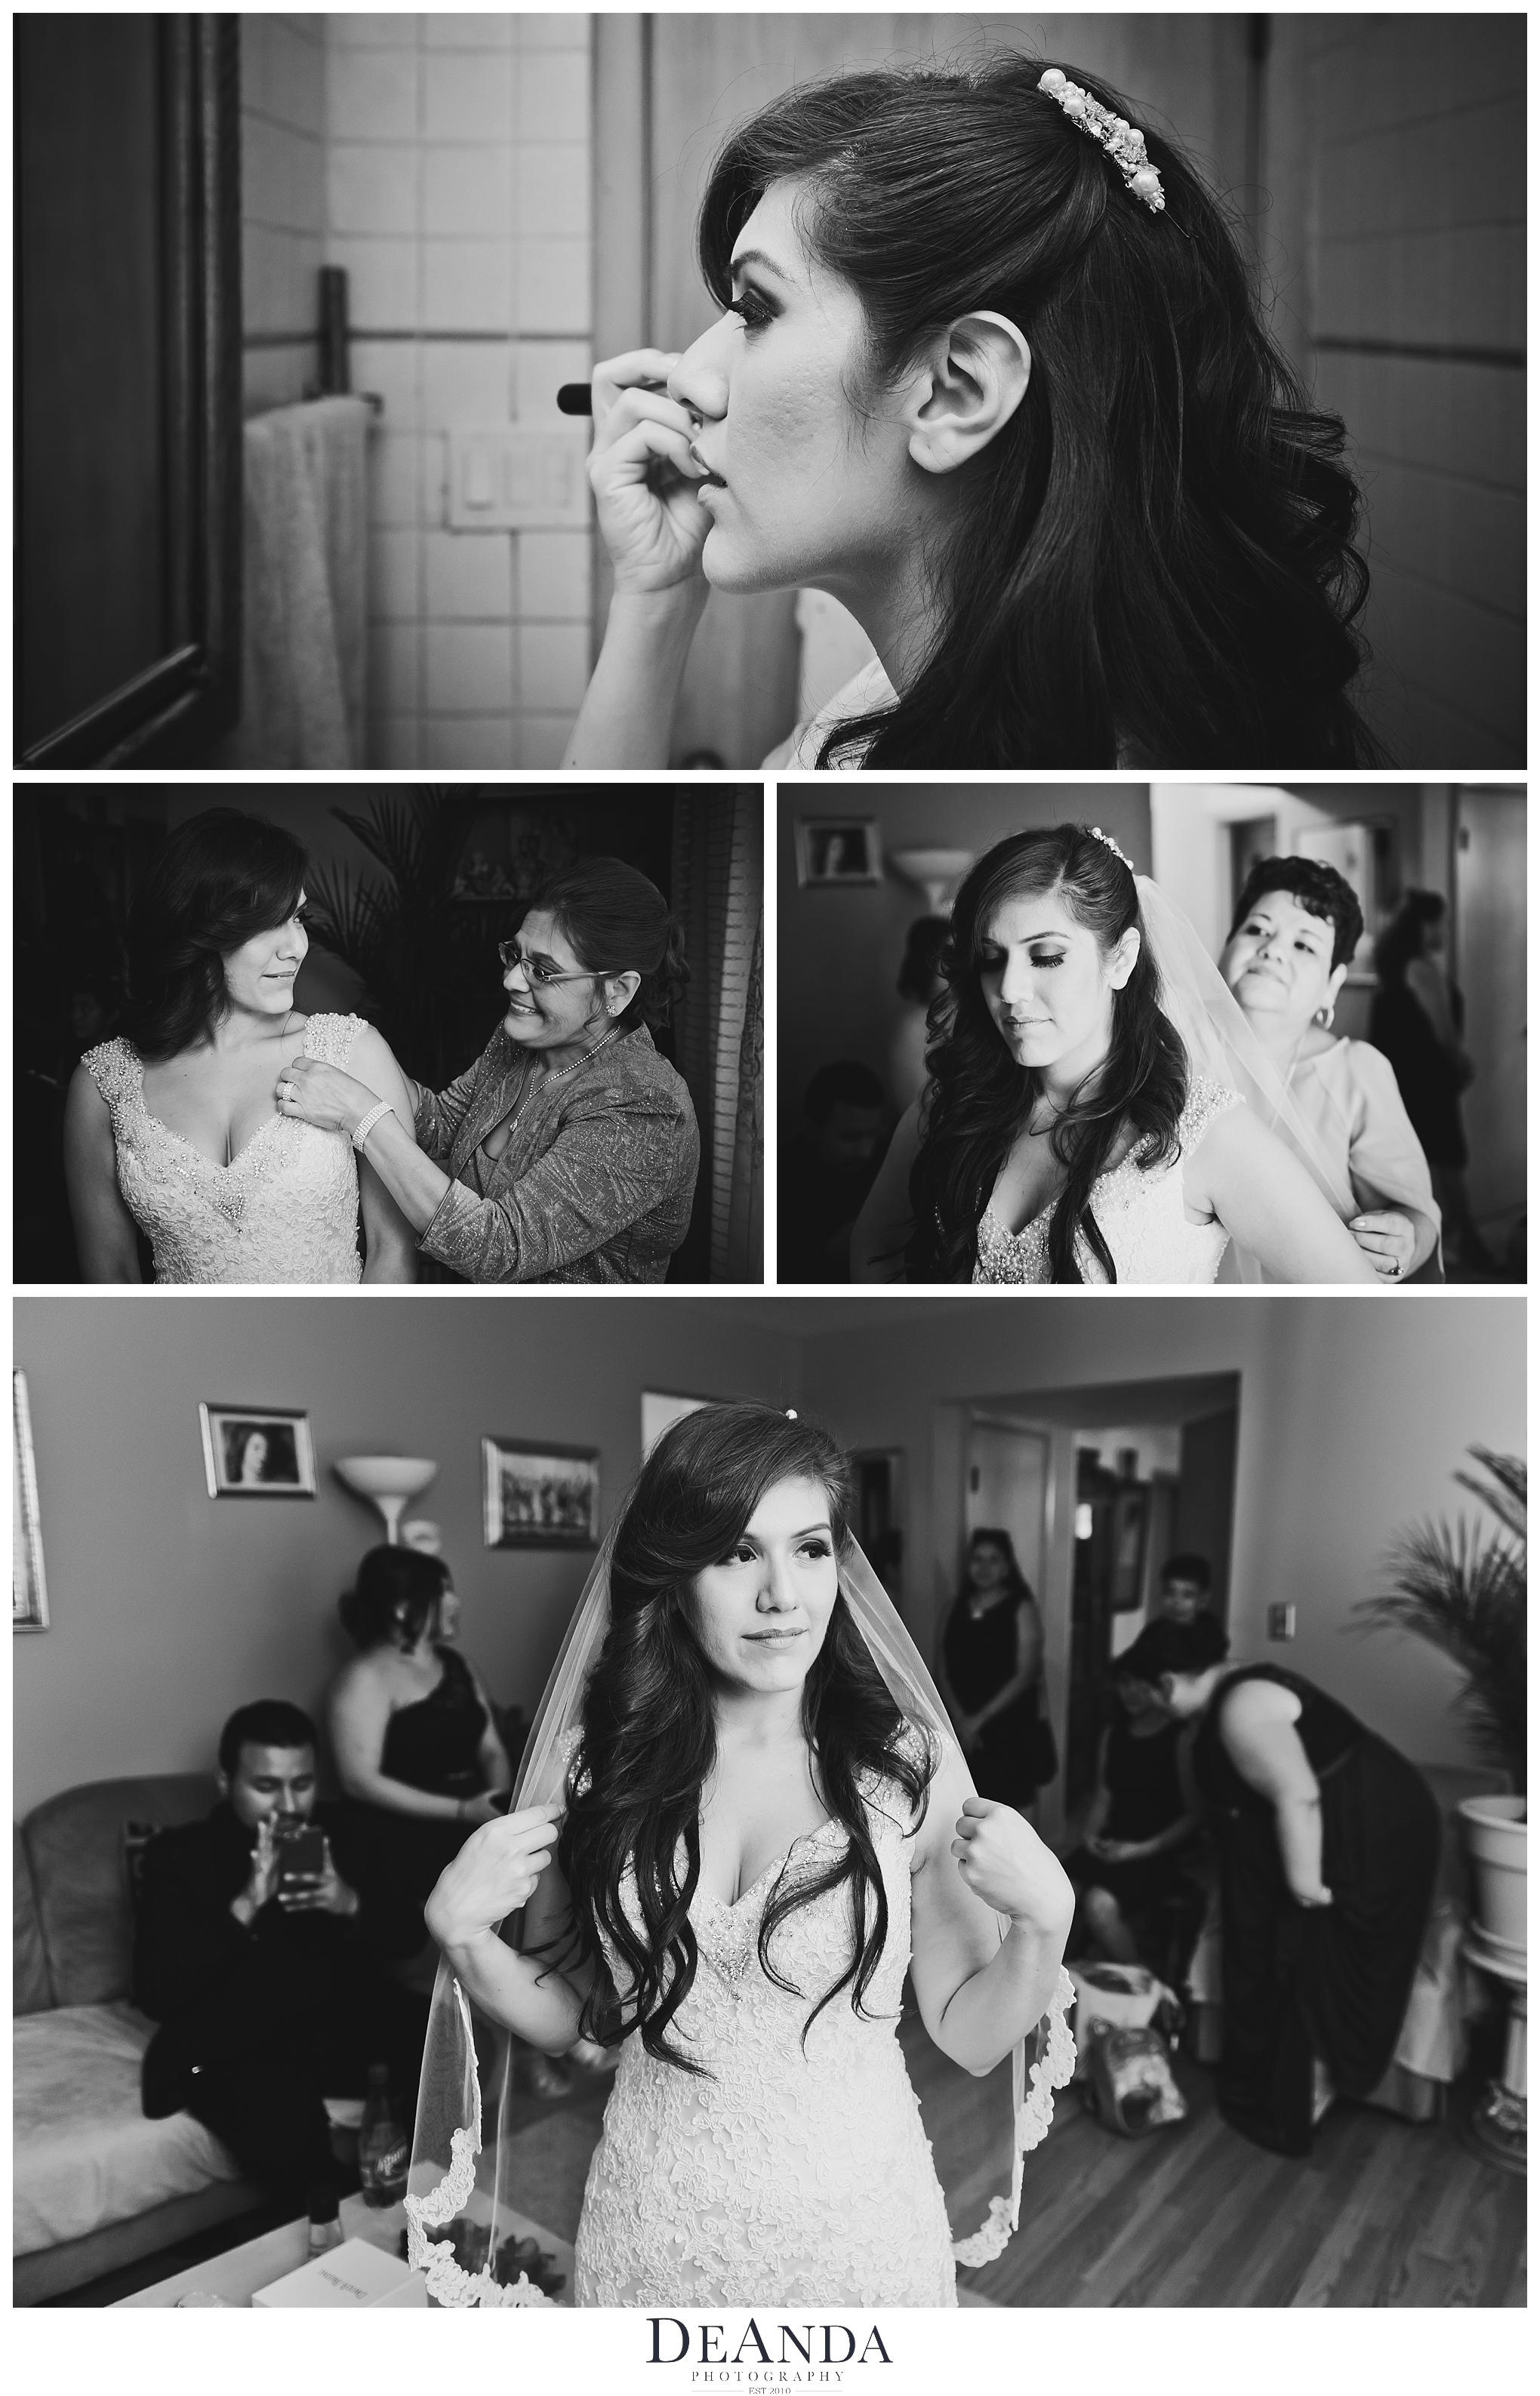 bride getting ready at her home in black and white